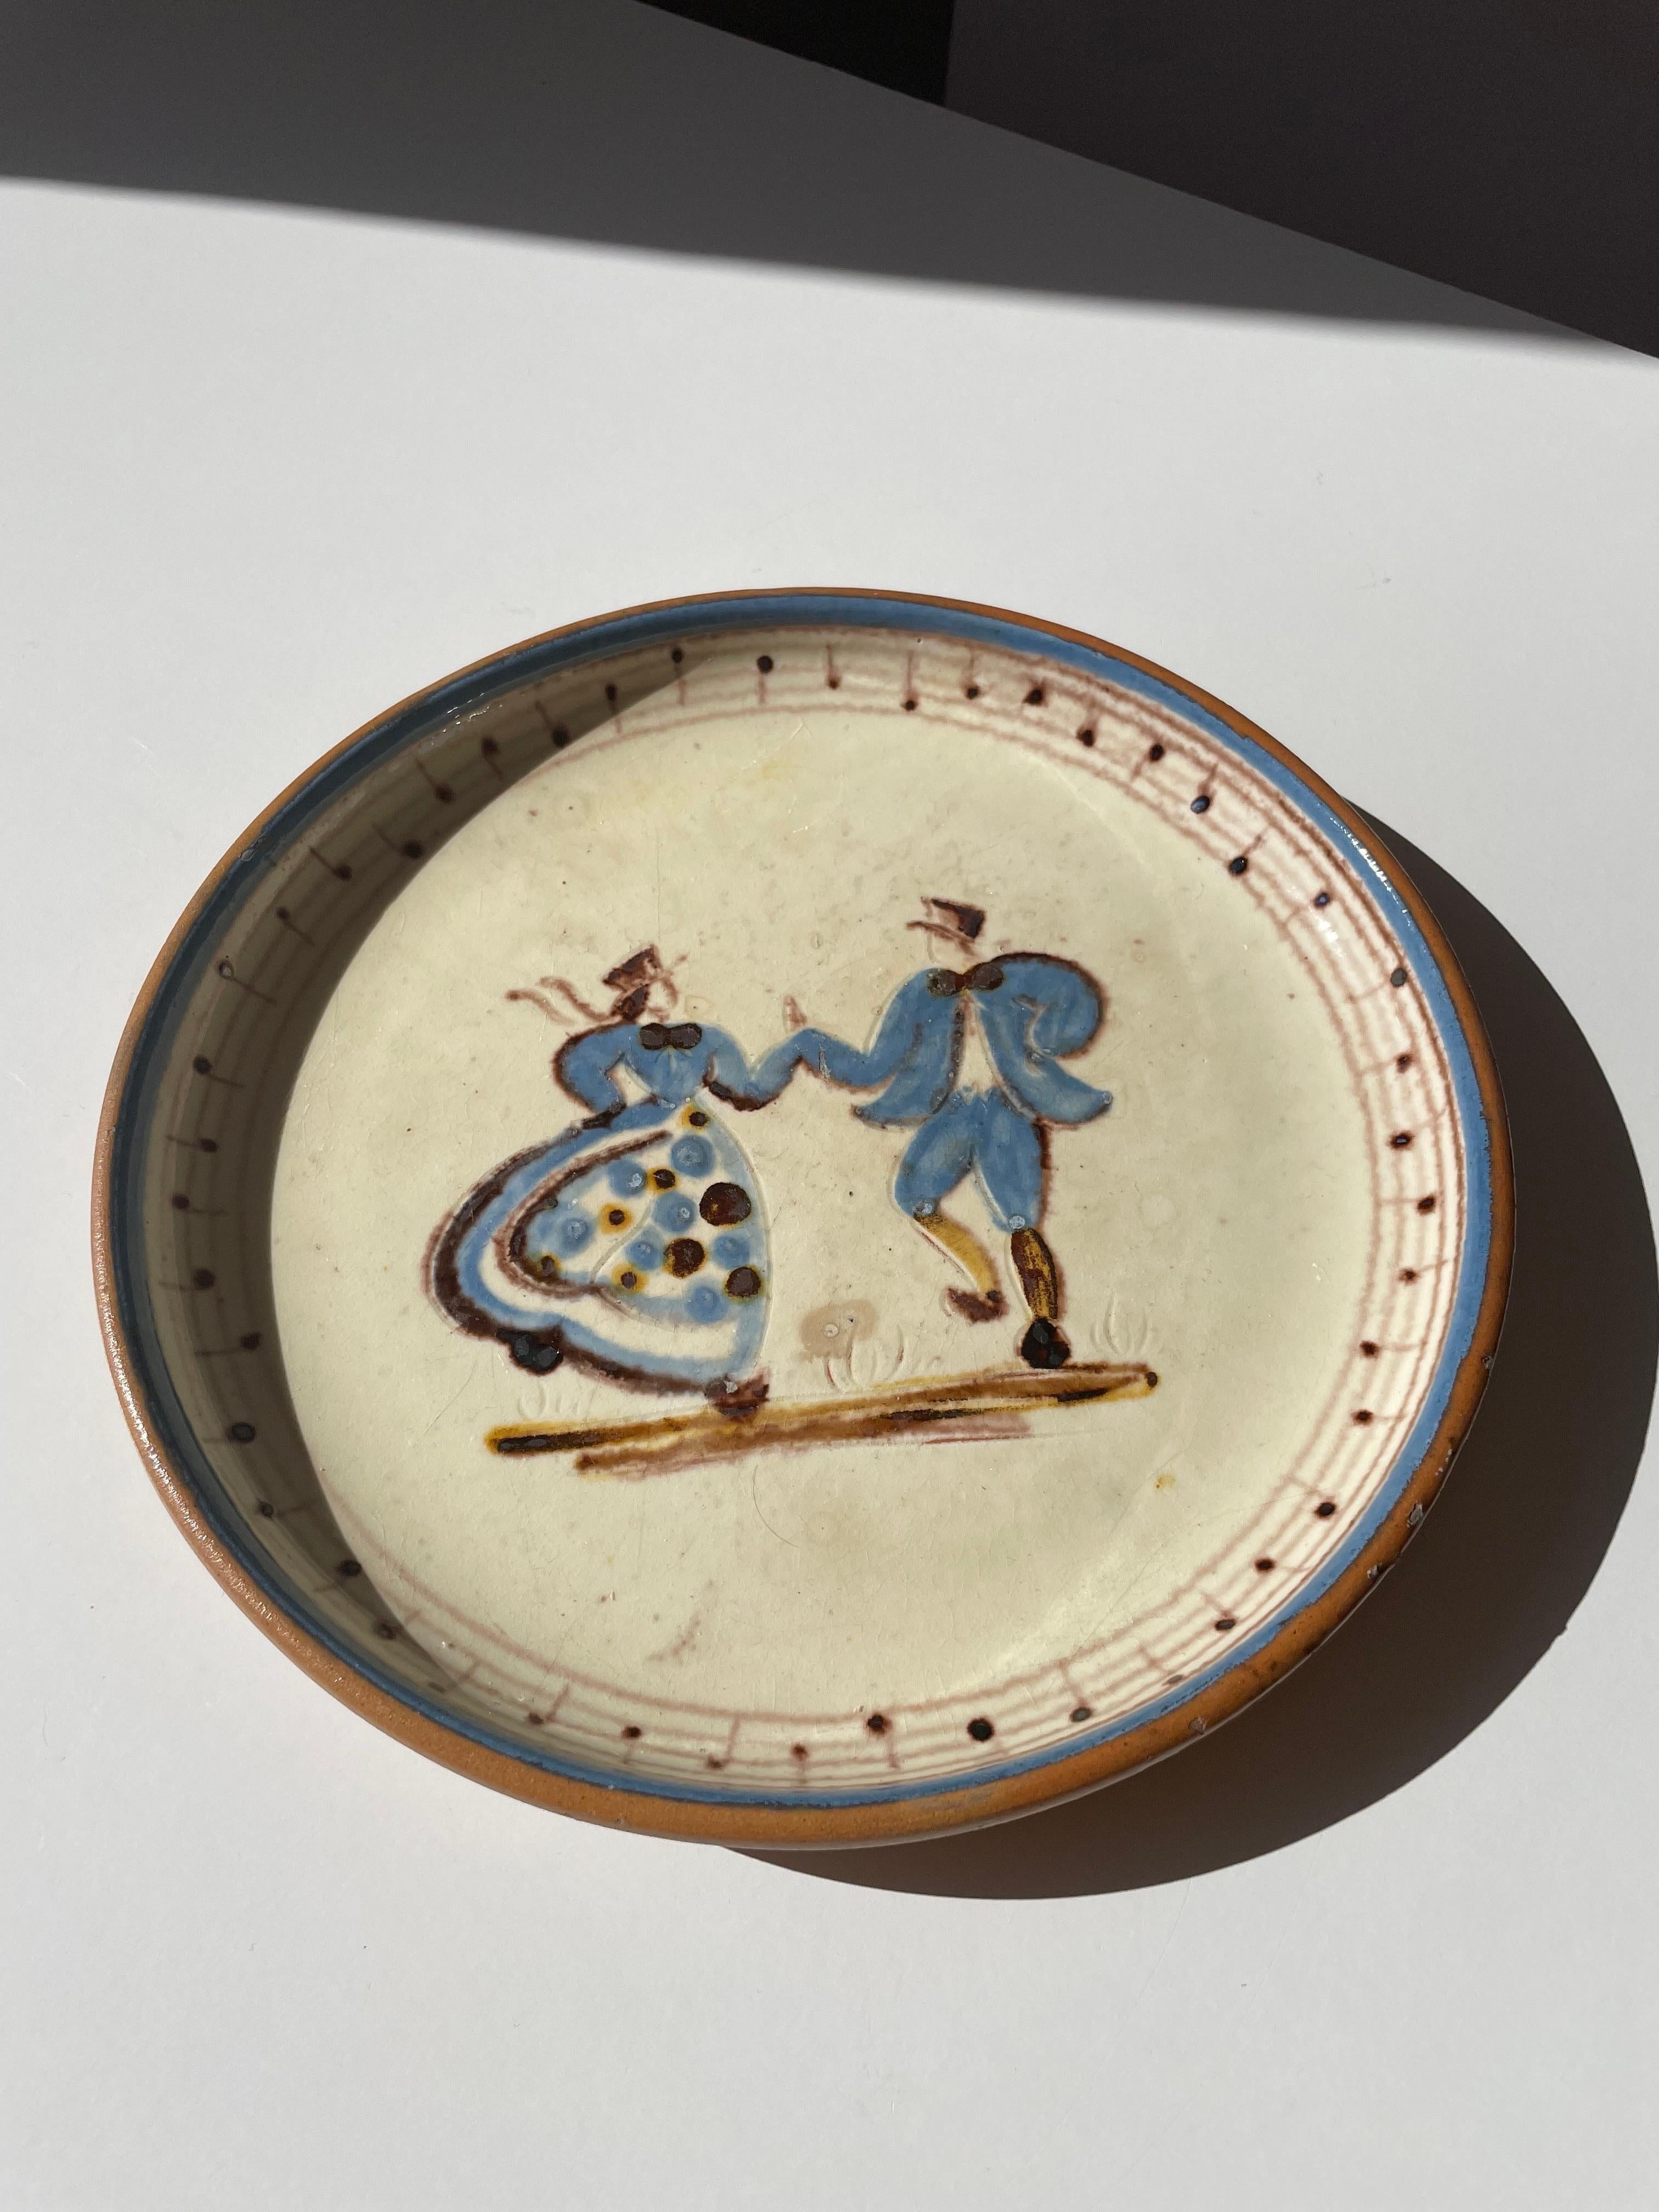 Mid-Century Modern Knabstrup Hand-Painted Ceramic Decorative Plate, 1950s For Sale